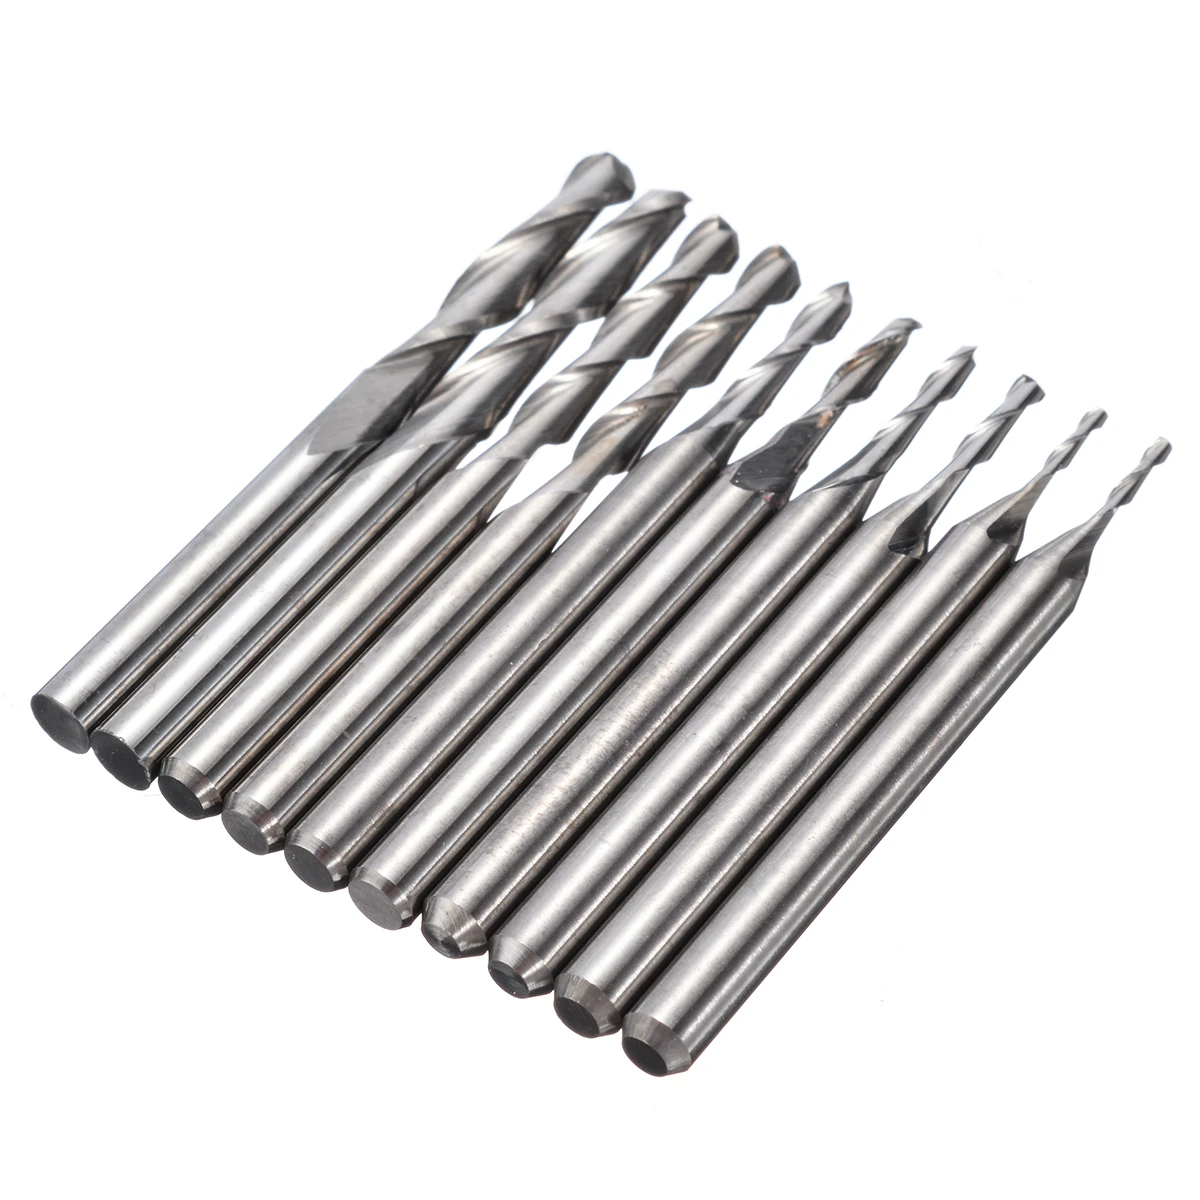 Set of 5 3.175 x 1.5 x 6mm Two Flute Carbide Ball Nose End Mills CNC Router Bit